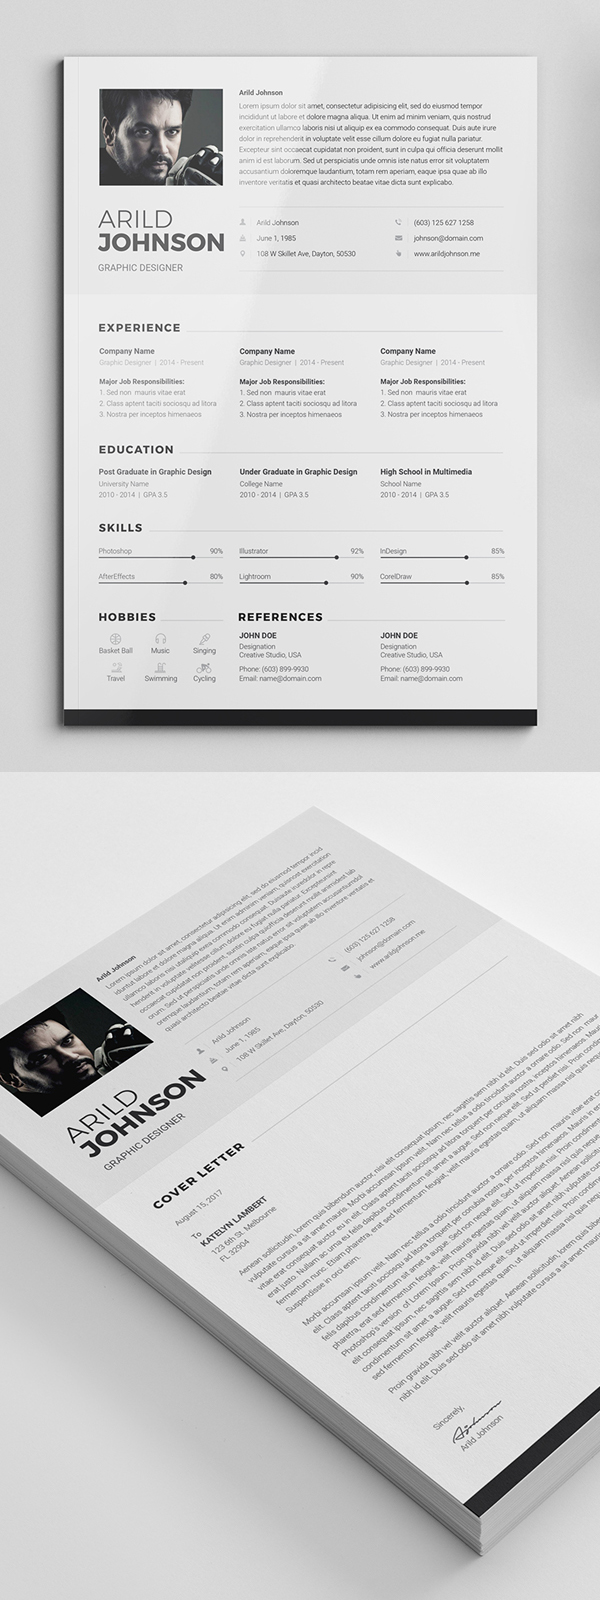 Freebie: Creative Simple Resume Template & Cover Letter